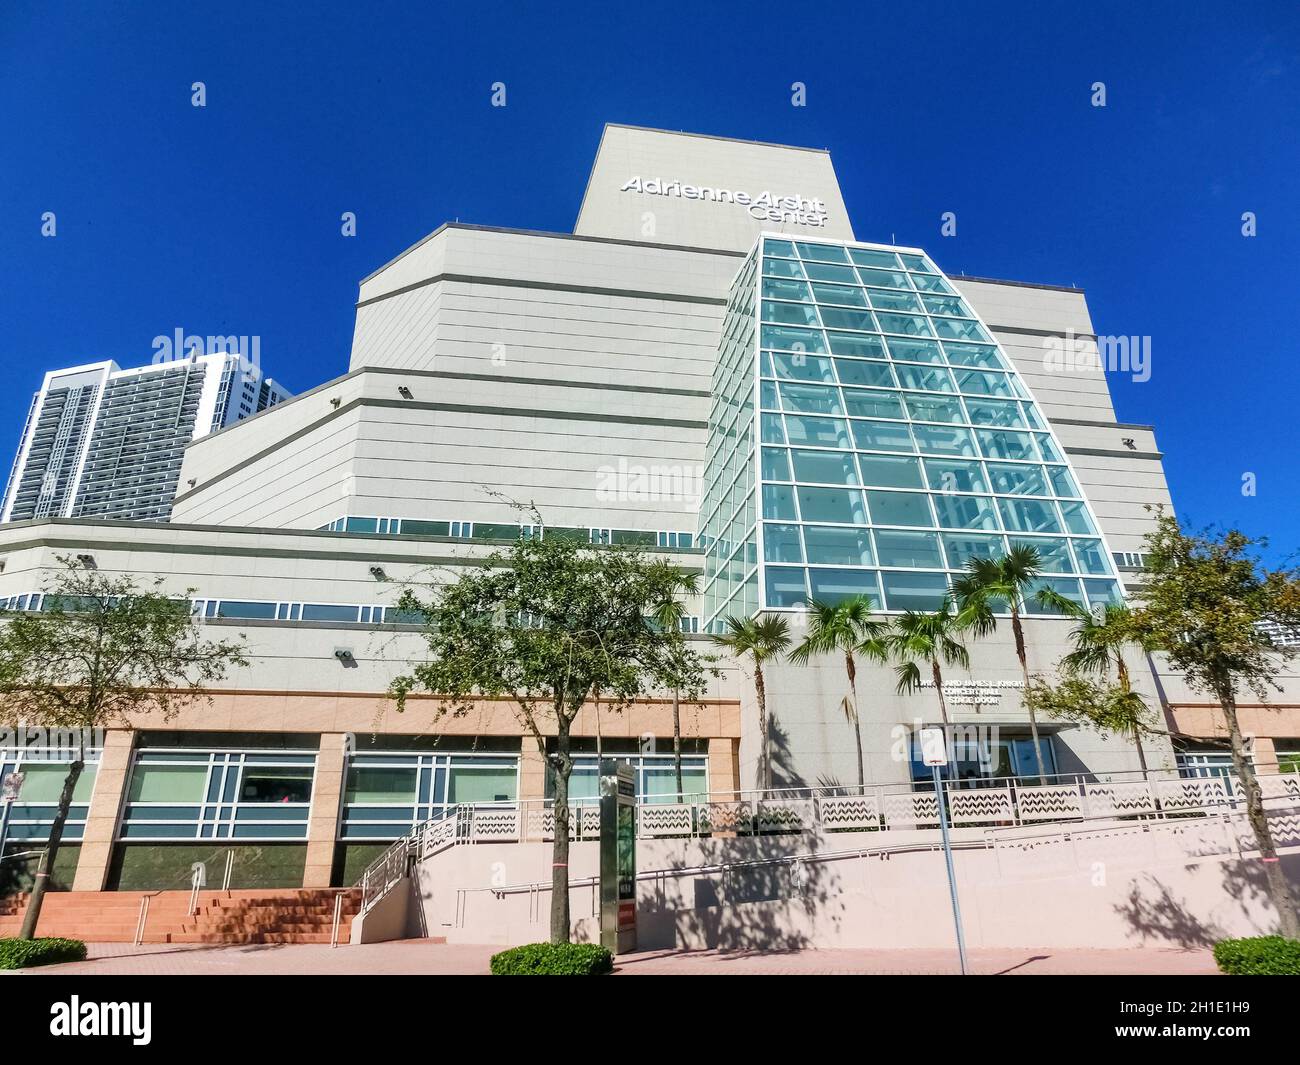 Miami, USA - November 30, 2019: View of the landmark Adrienne Arsht Center for the Performing Arts of Miami Dade County, the largest performing arts c Stock Photo